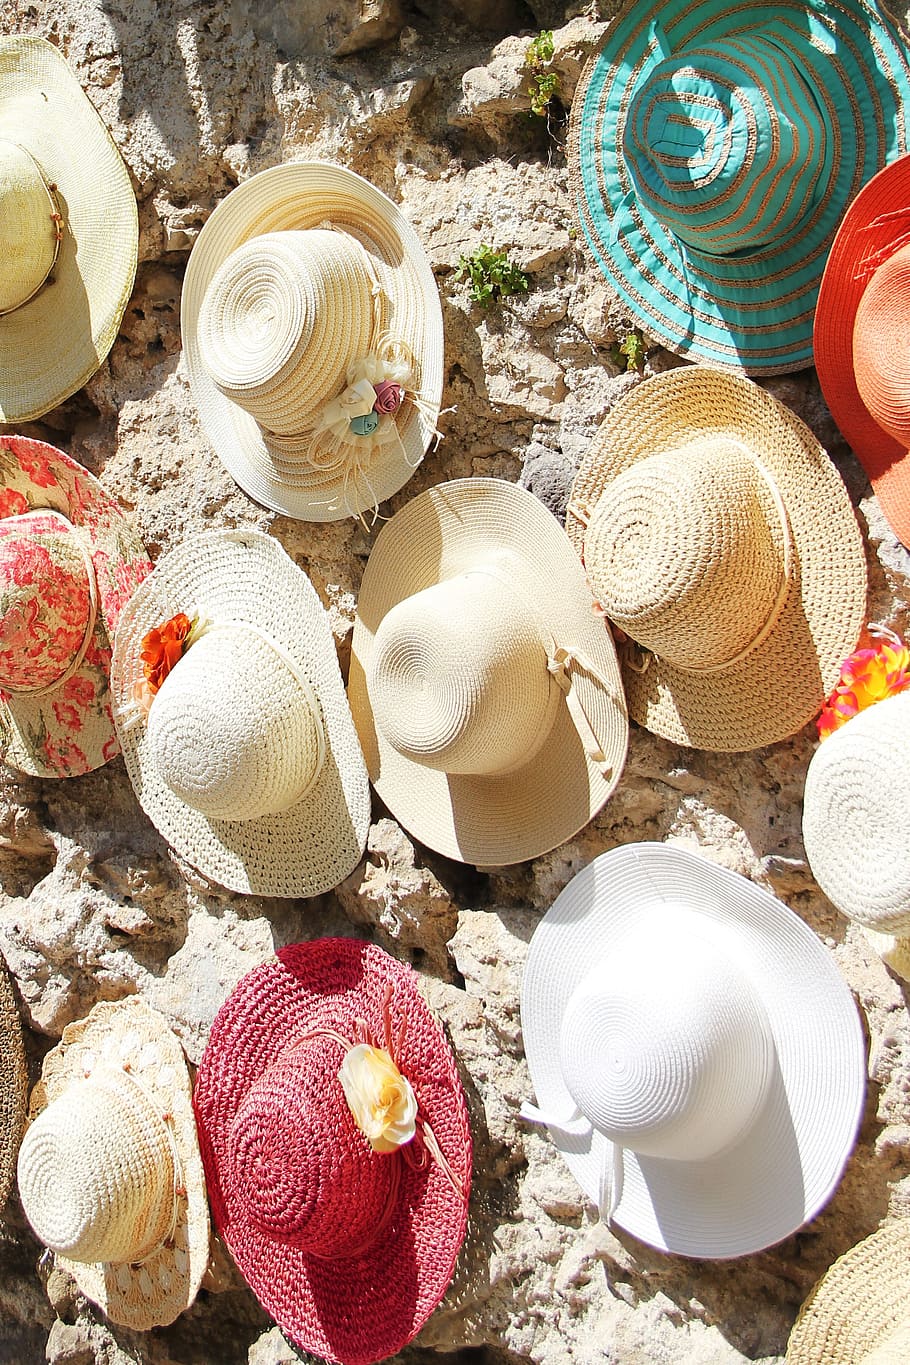 hat, hats, sun hat, sun, straw hat, headwear, fashion, color, colorful, high angle view